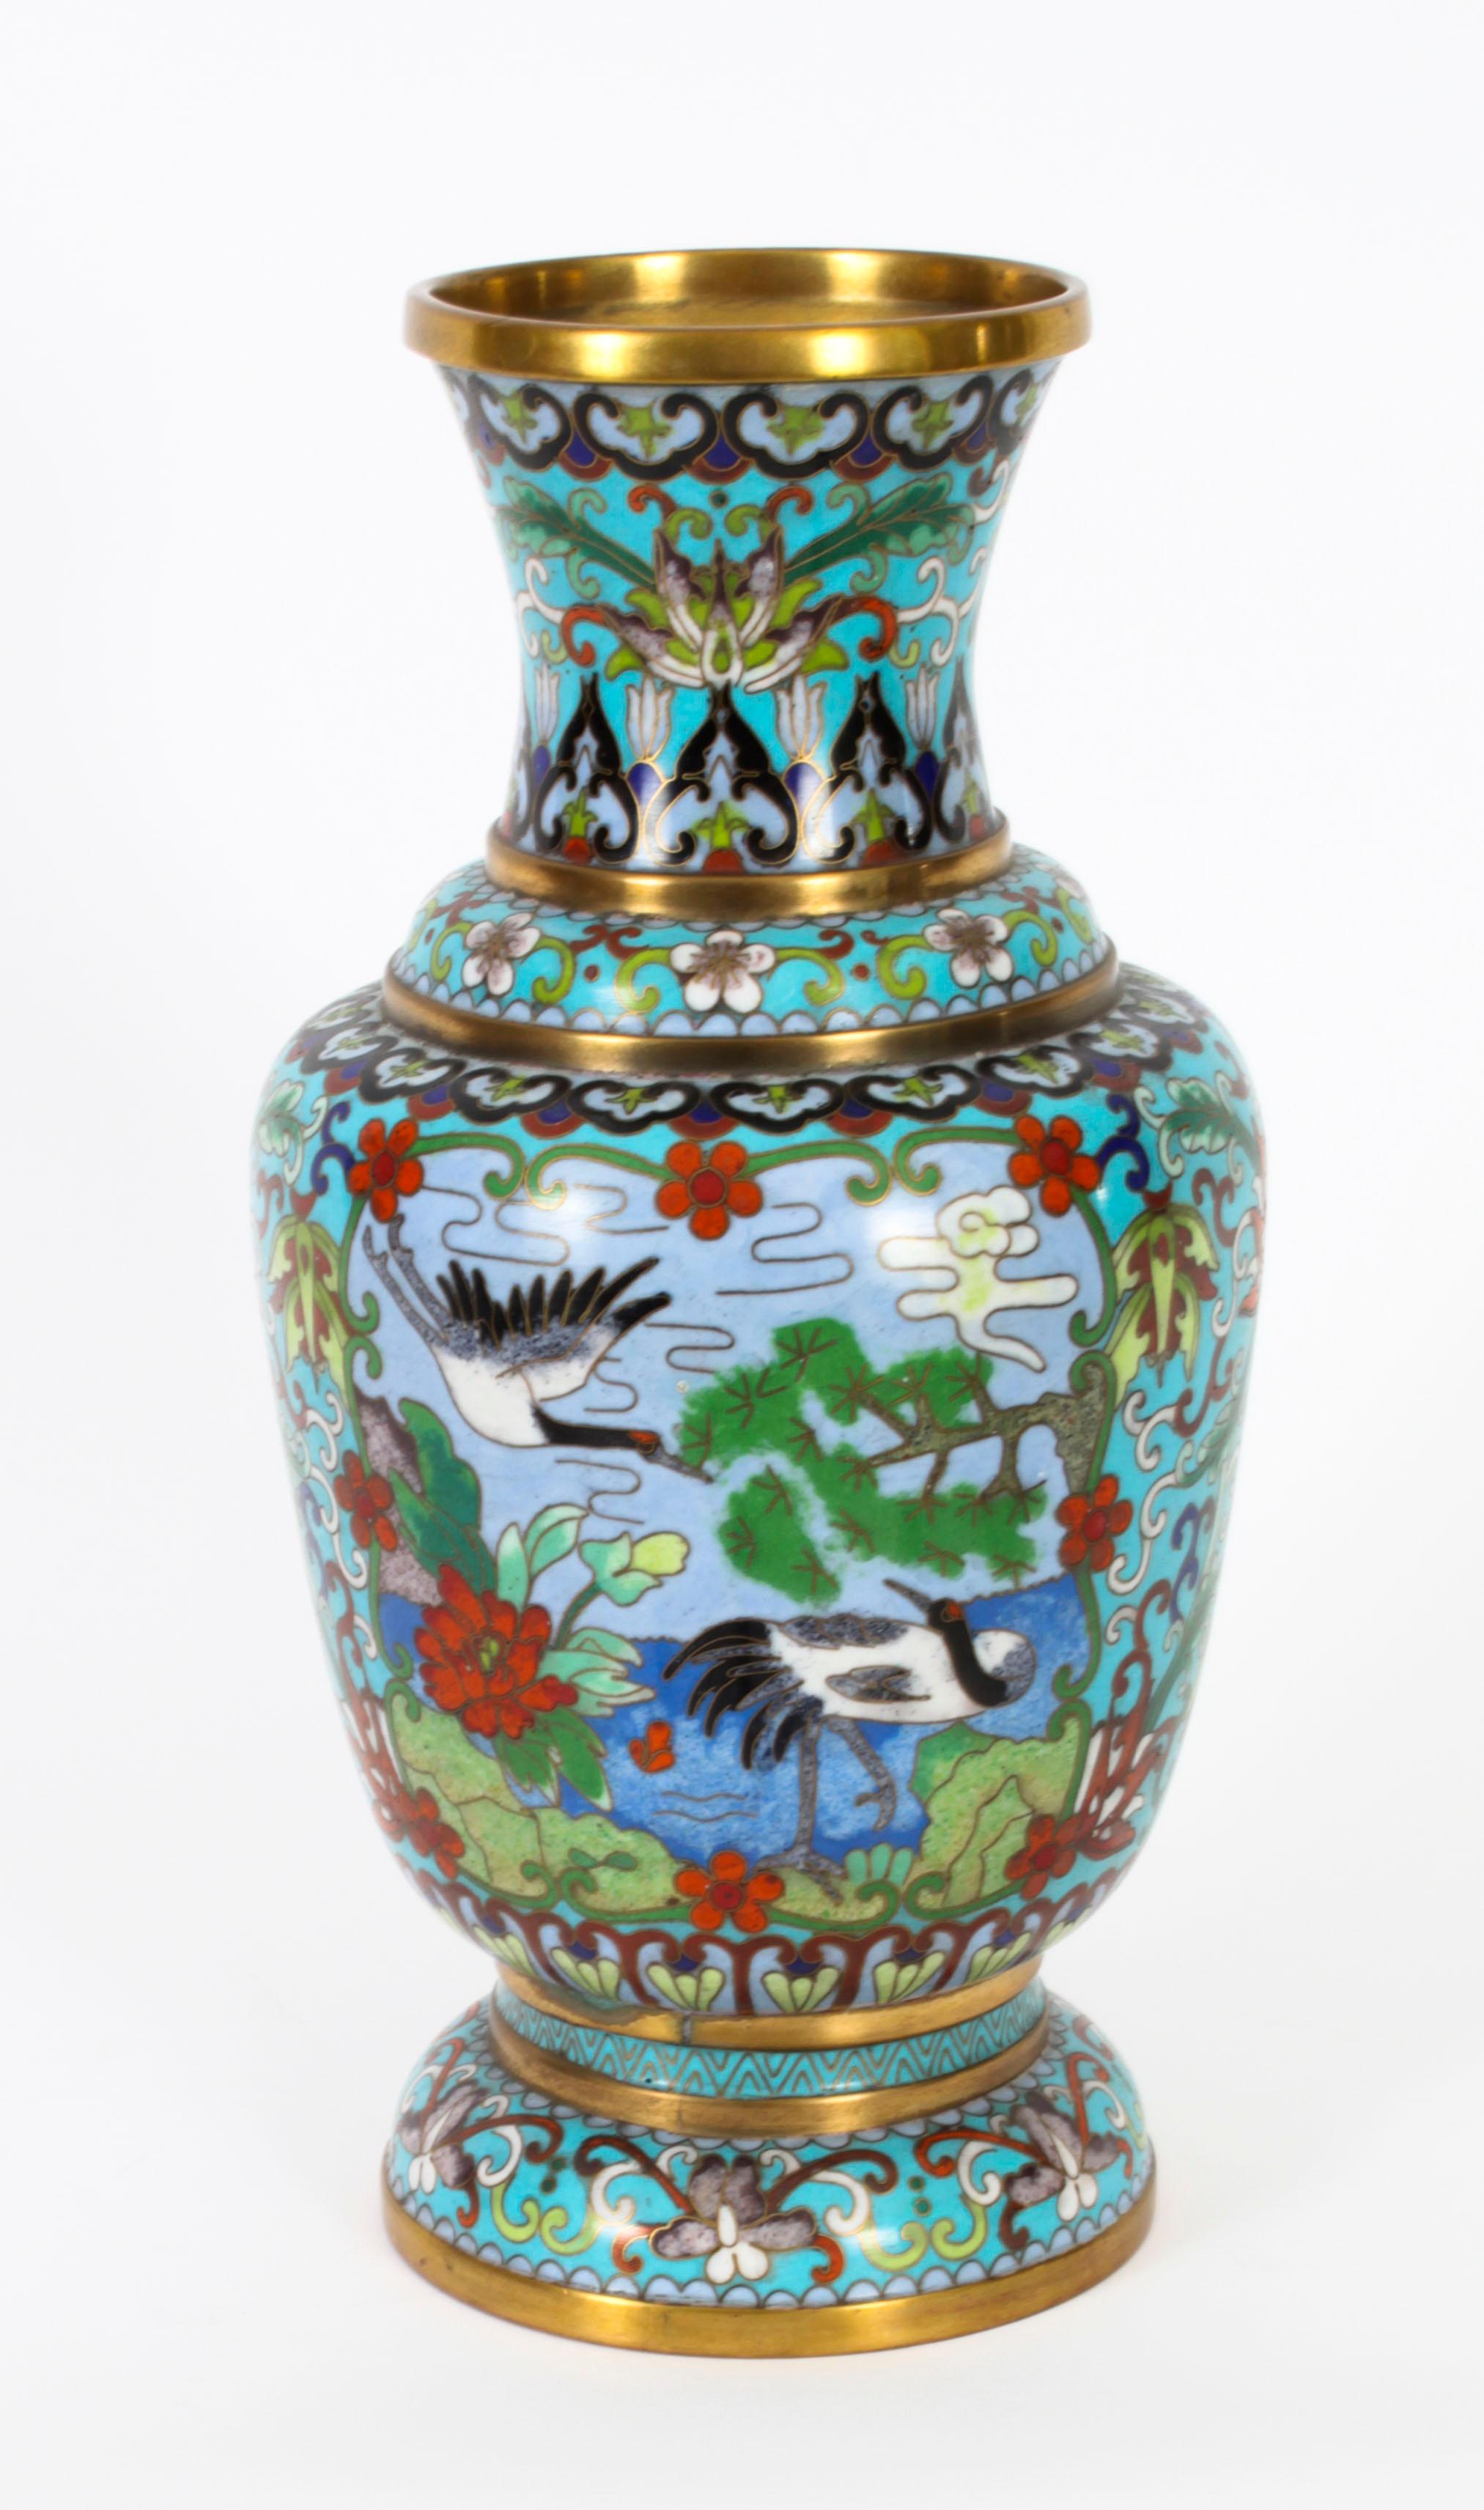 This is a large vintage pair of Chinese enamelled cloisonné vases, early 20th century in date.

The baluster shaped vases feature wonderful bright vibrant colours and tonality with an excellent aged patina.

The enamelled body has a pale blue